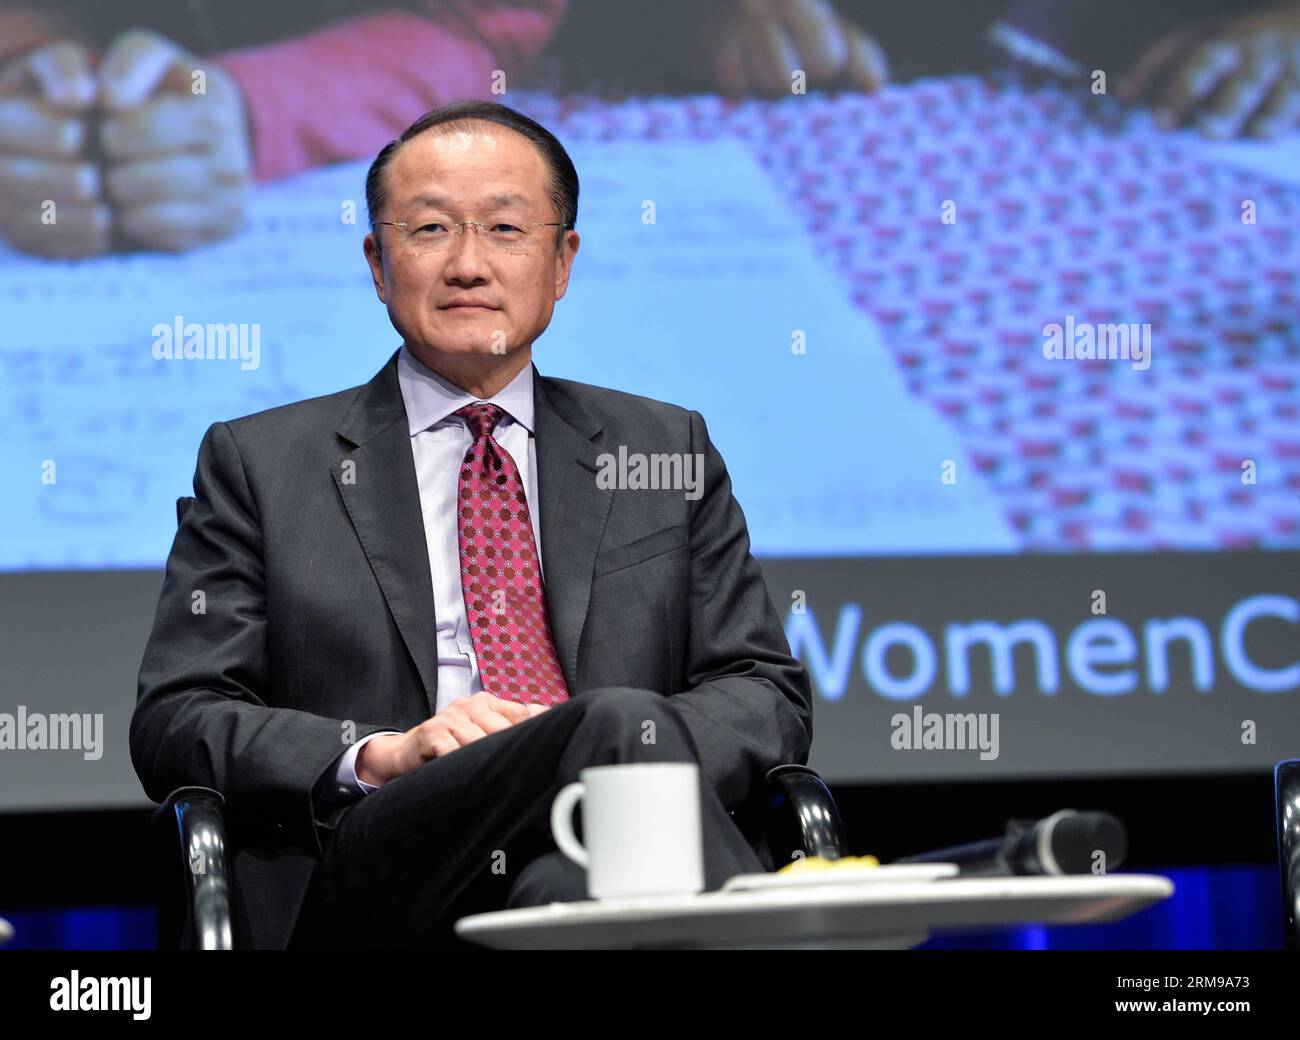 WASHINGTON D.C., May 14, 2014 - World Bank Group President Jim Yong Kim attends the launch ceremony of World Bank Group s new report Voice and Agency: Empowering Women and Girls for Shared Prosperity finds in Washington D.C., capital of the United States, May 14, 2014. Girls with little or no education are far more likely to be married as children, suffer domestic violence, live in poverty, and lack a say over household spending or their own health care than better-educated peers, according to the new report by the World Bank Group on Wednesday. (Xinhua/Bao Dandan) US-WASHINGTON-WORLD BANK-REP Stock Photo